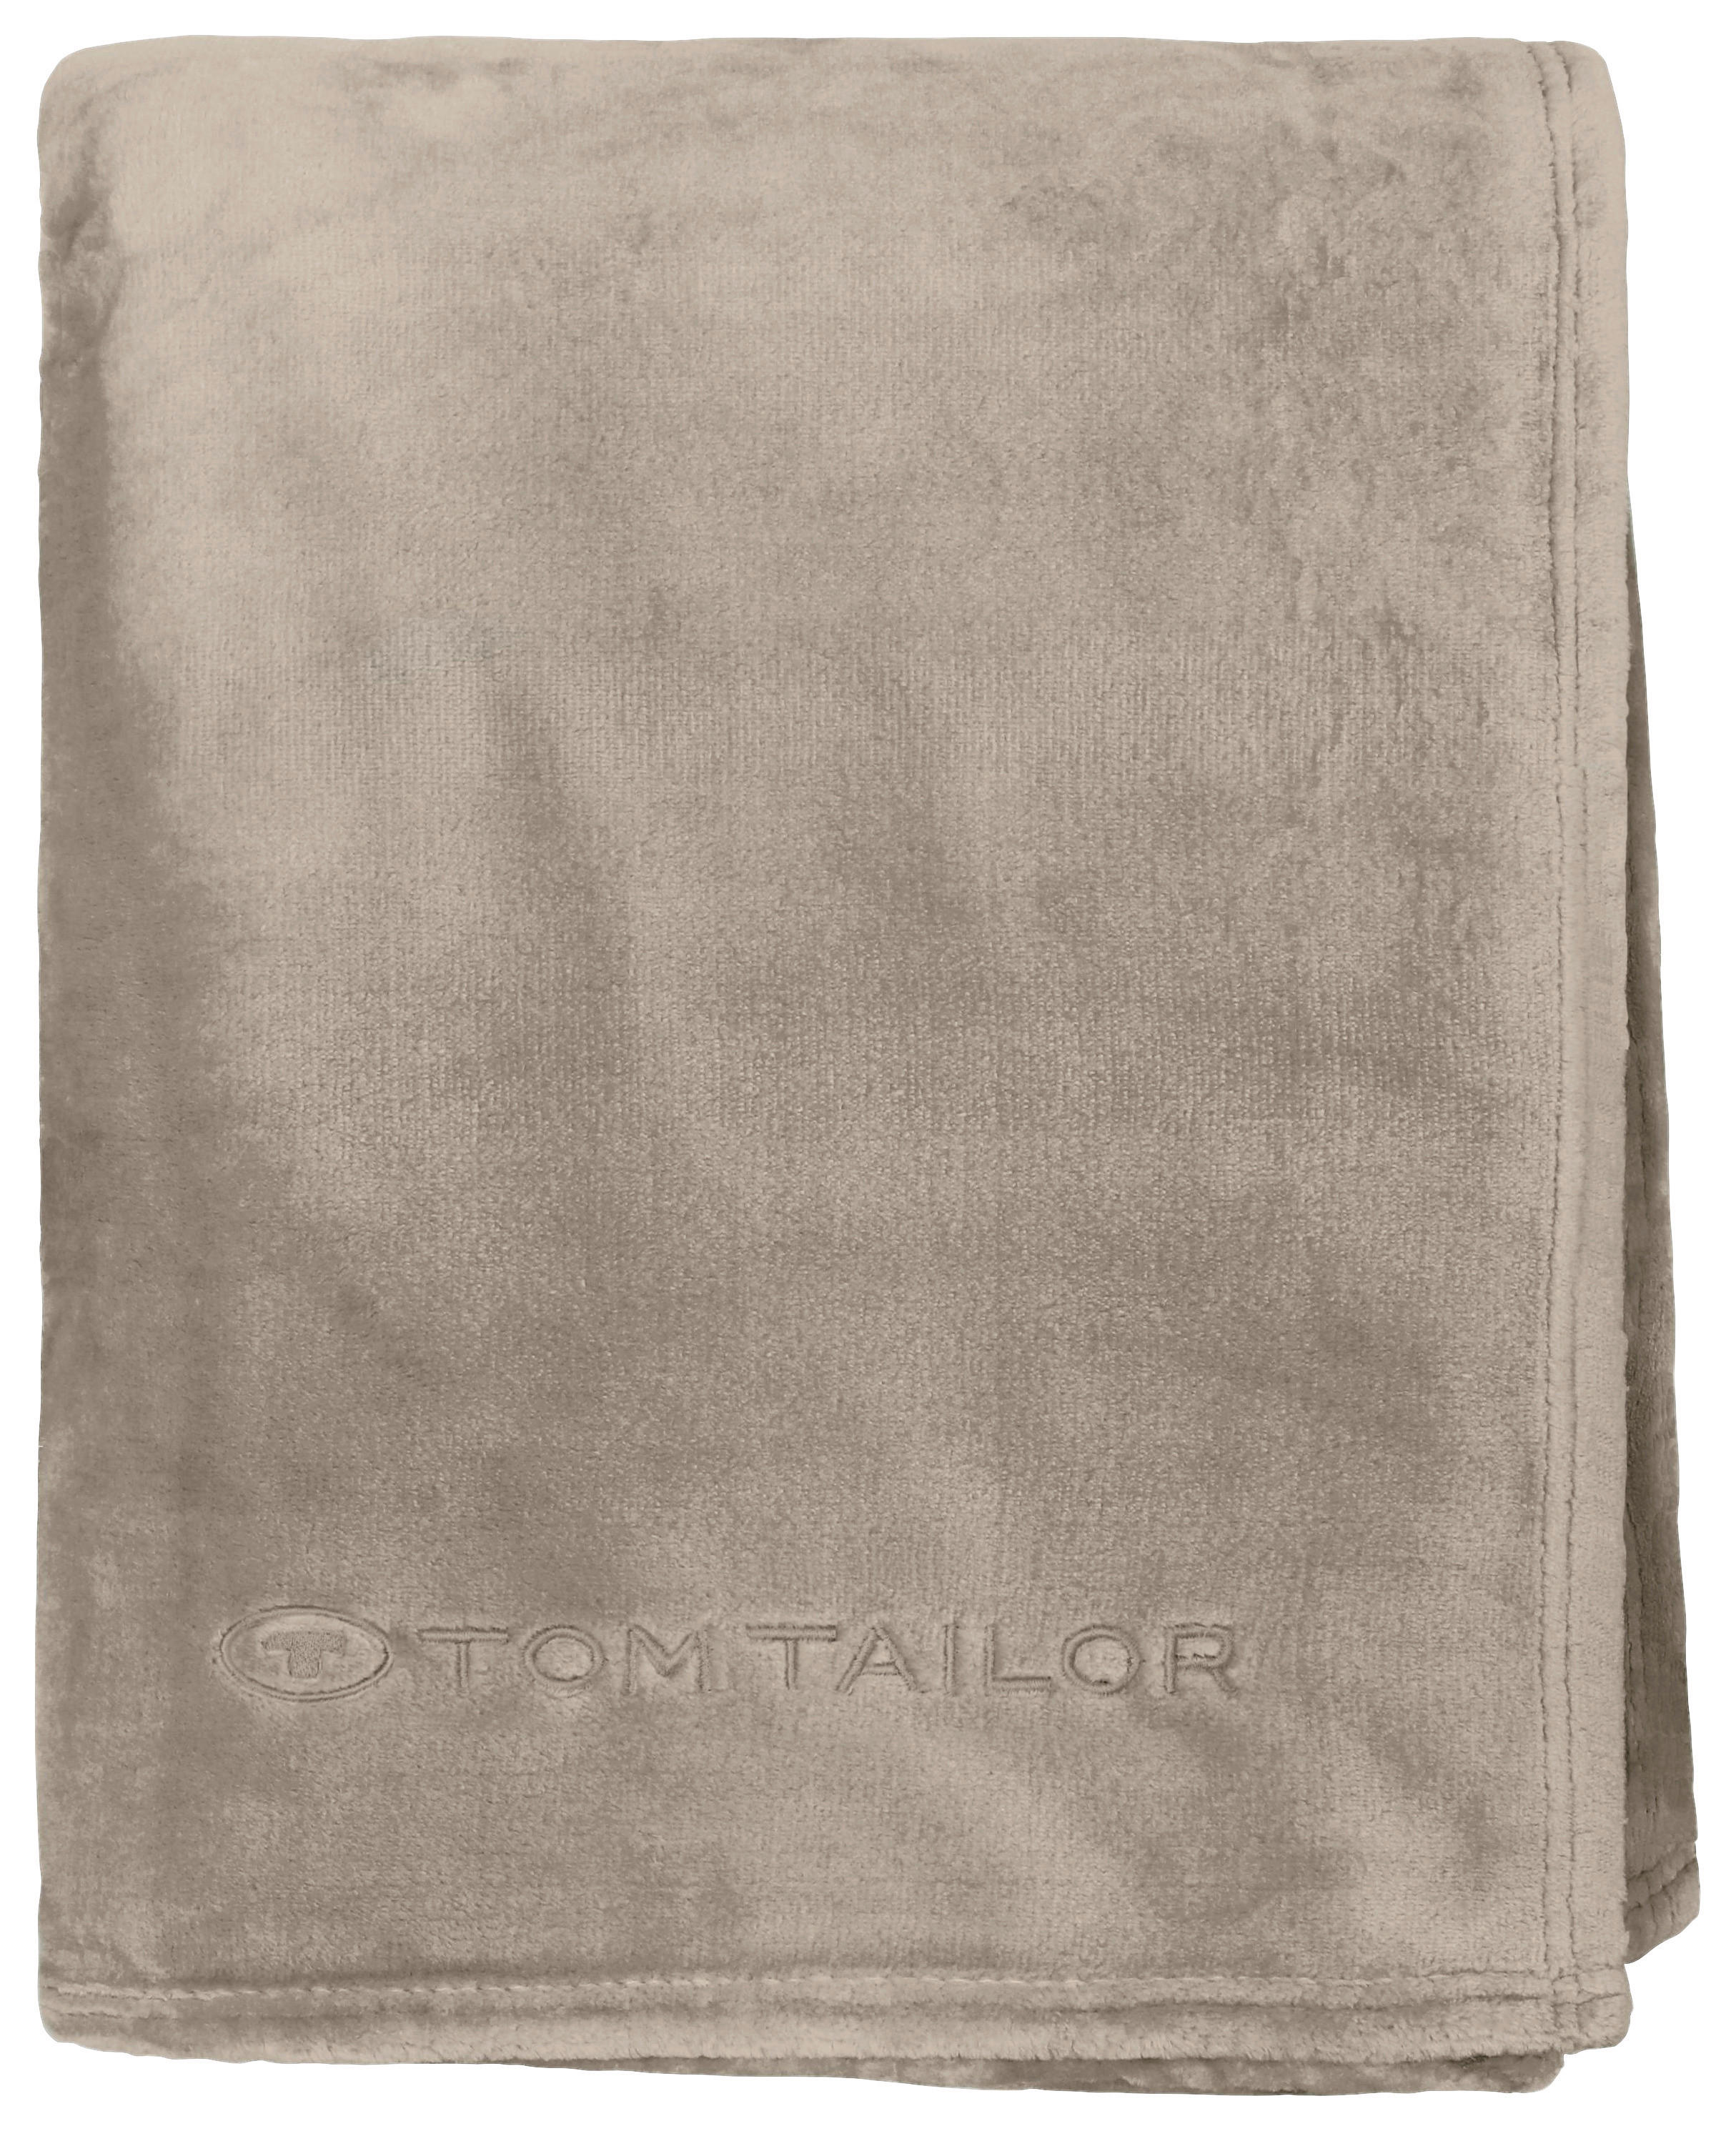 WOHNDECKE 237798 150X200 Taupe  - Taupe, KONVENTIONELL, Textil (40/40/10cm) - Tom Tailor